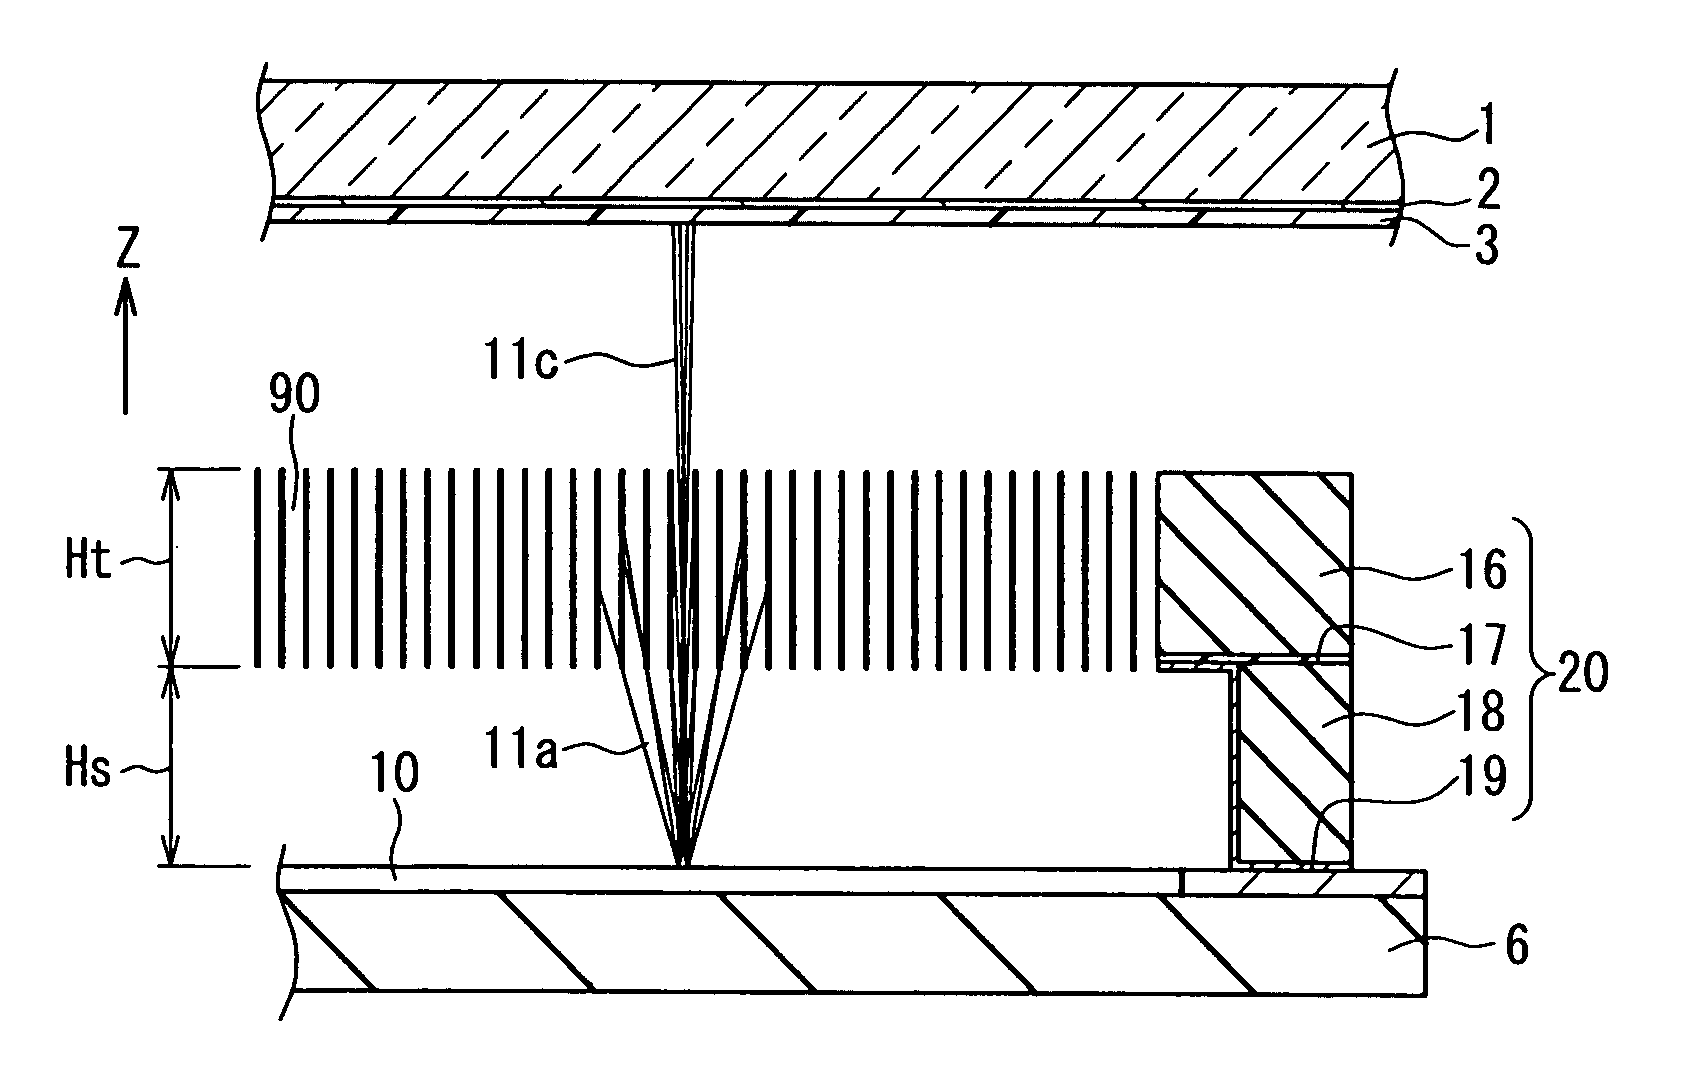 Mesh structure and field-emission electron source apparatus using the same